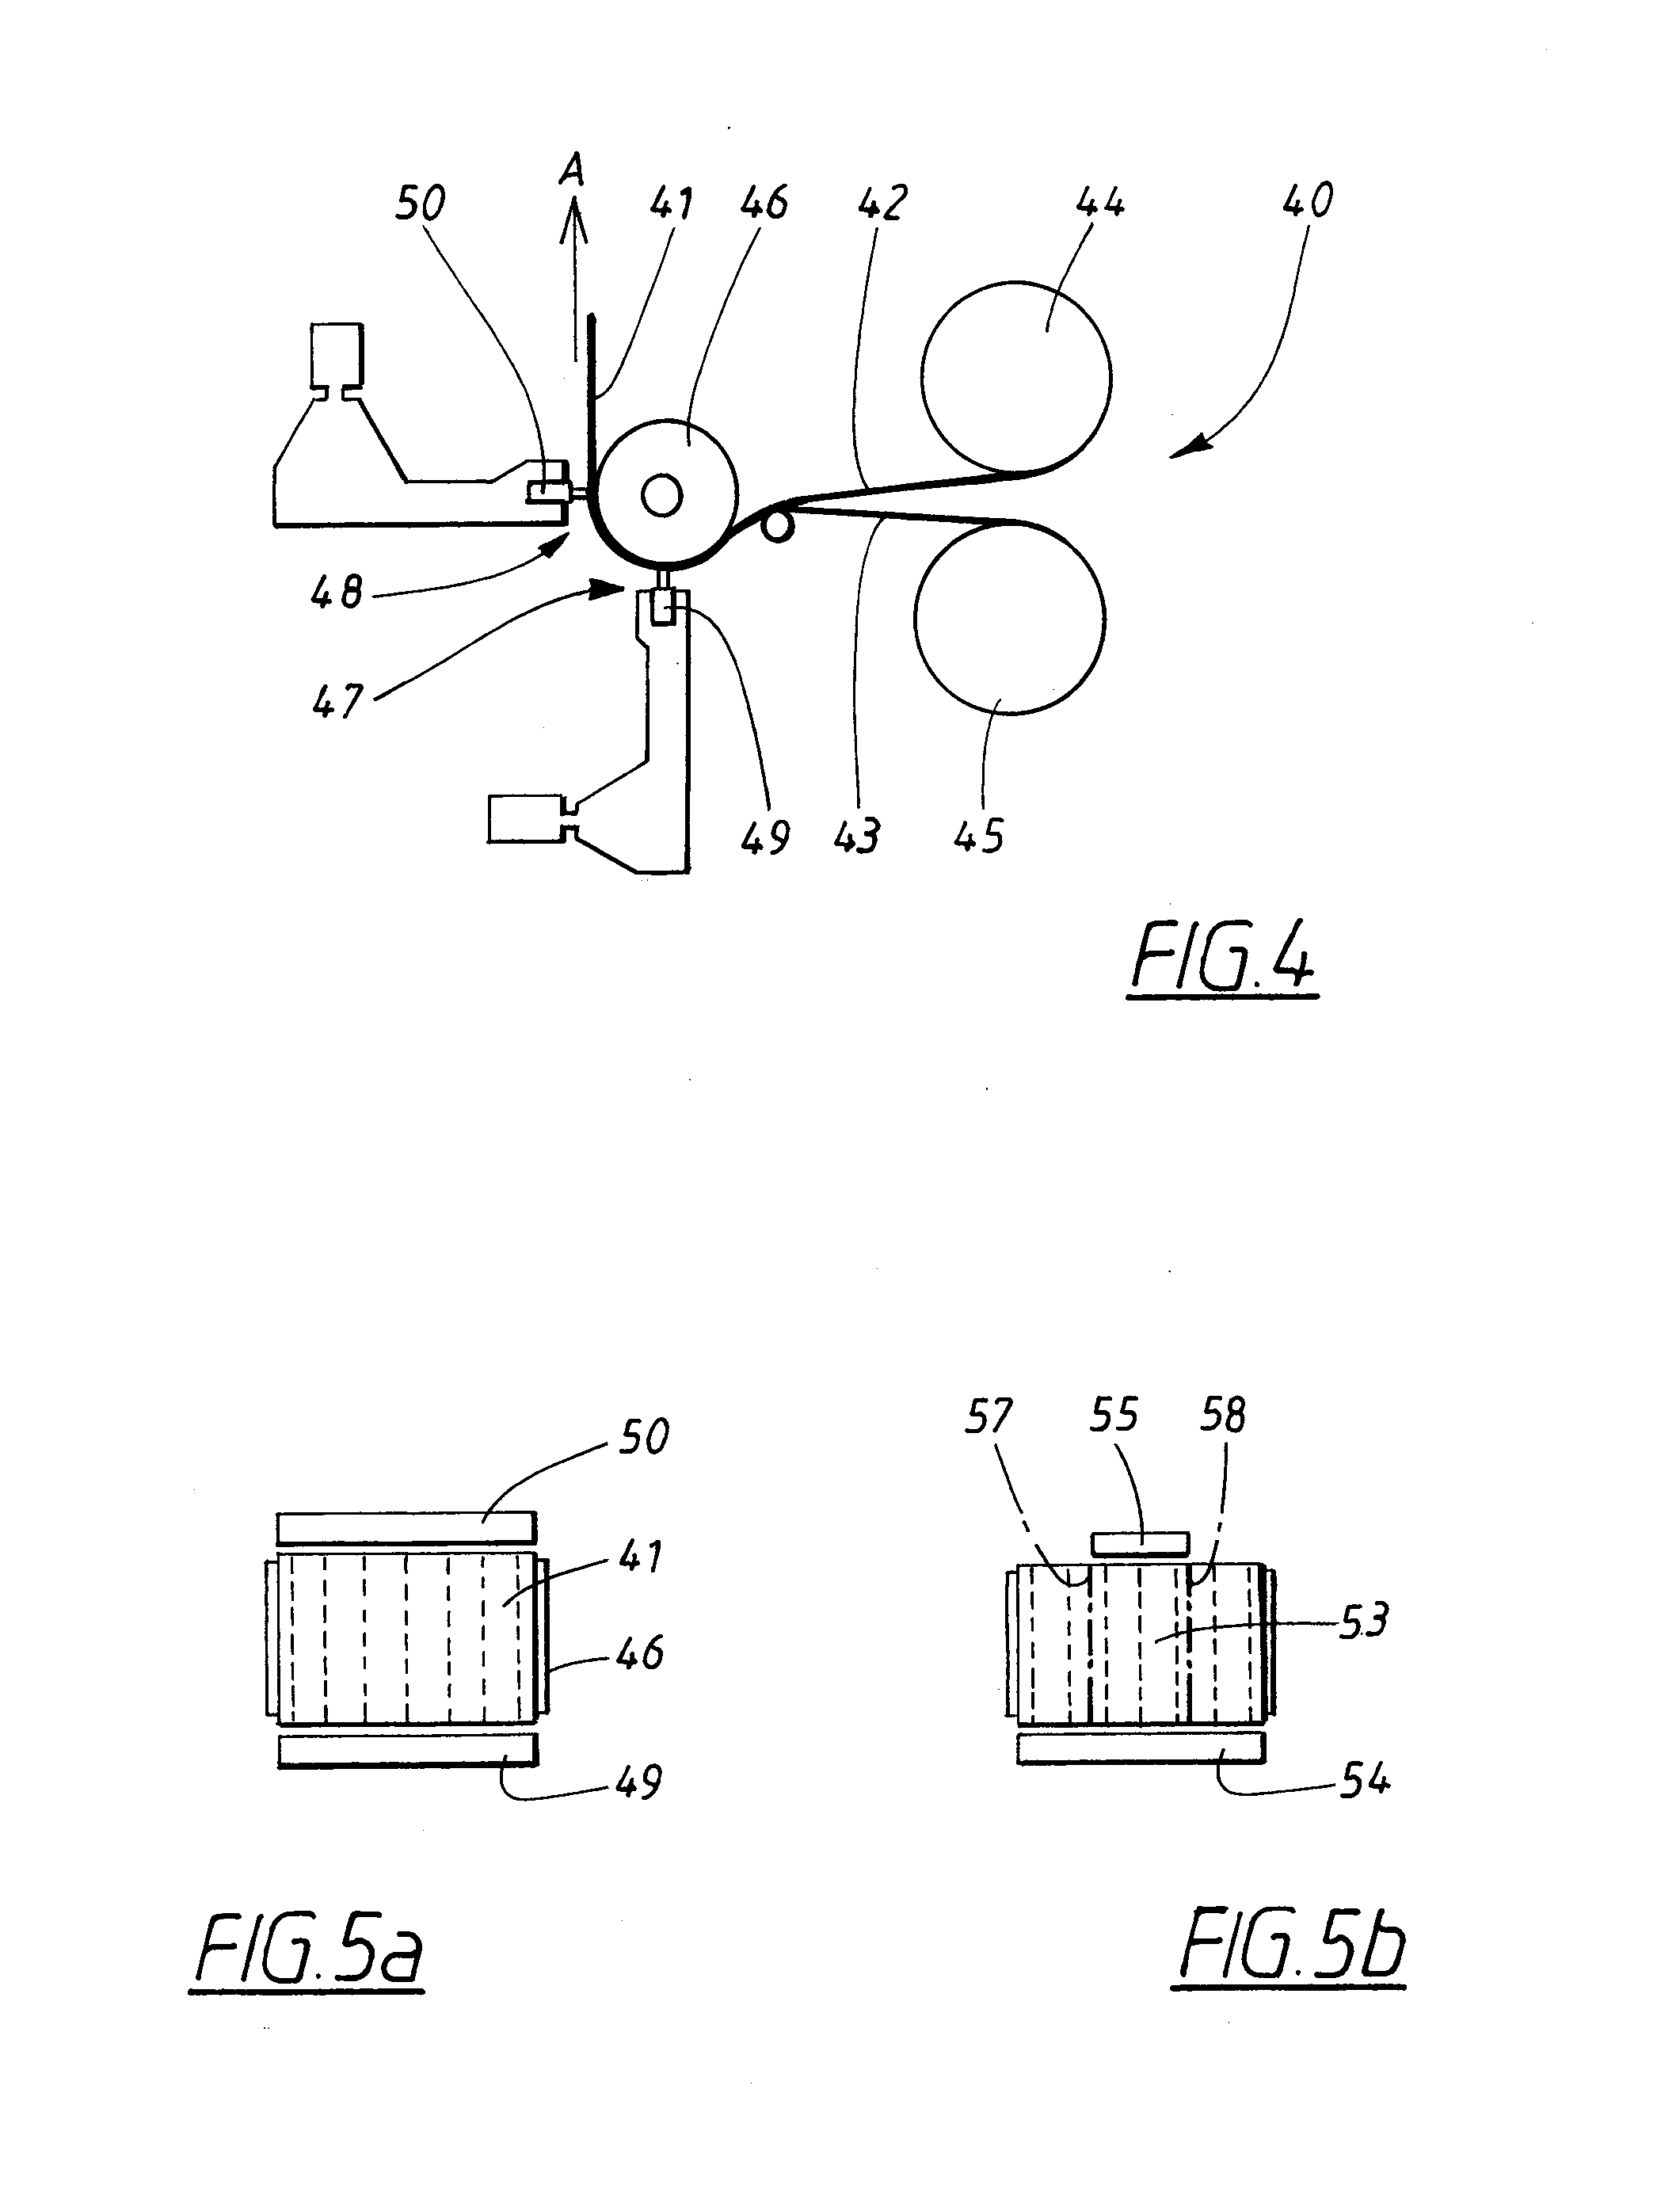 Material web for use in an absorbent article